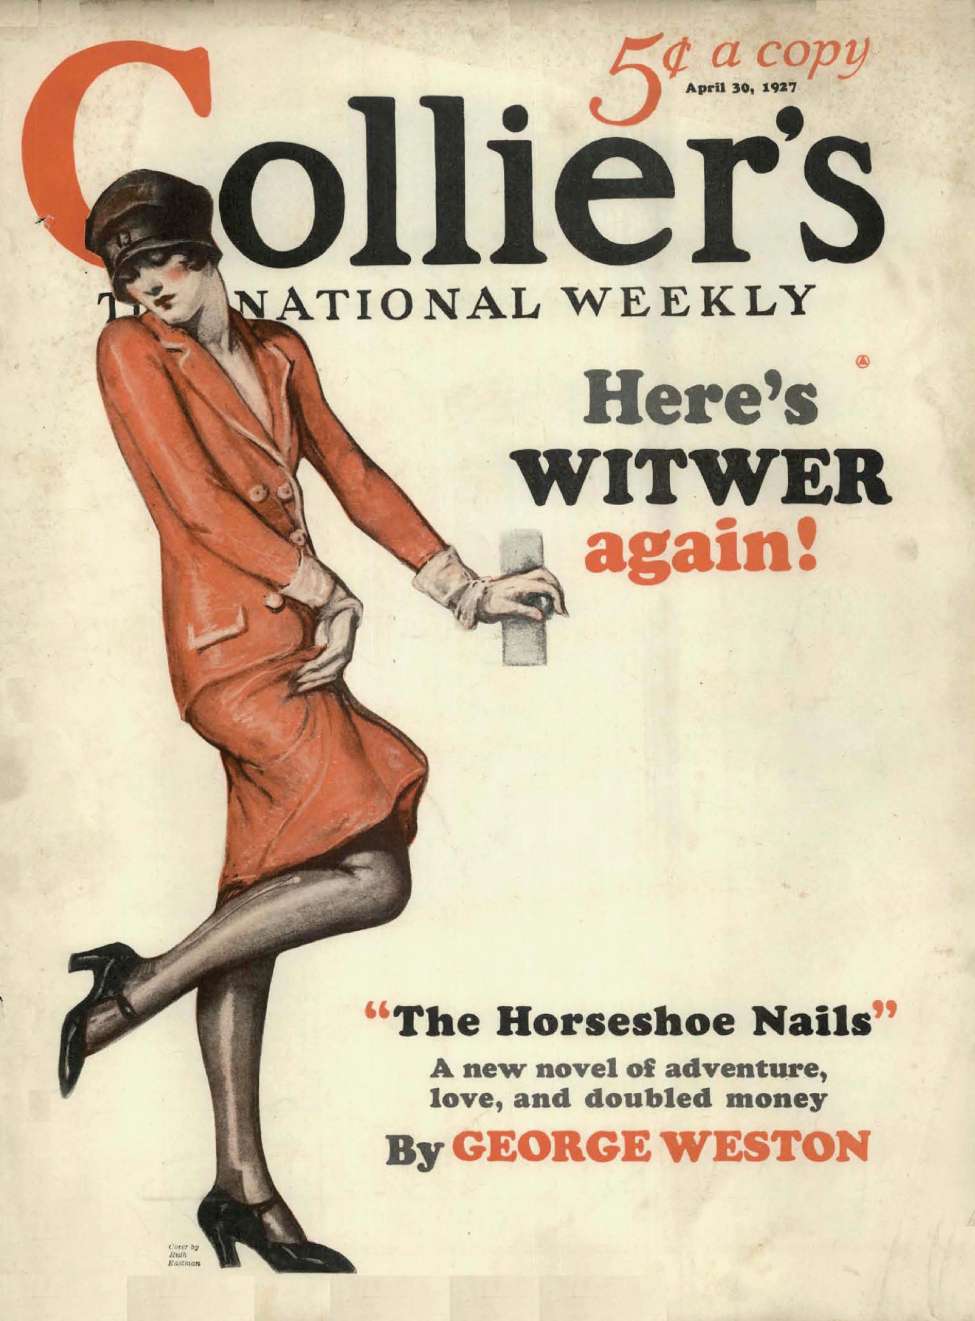 Collier's Weekly v079 18 (Collier's Weekly)